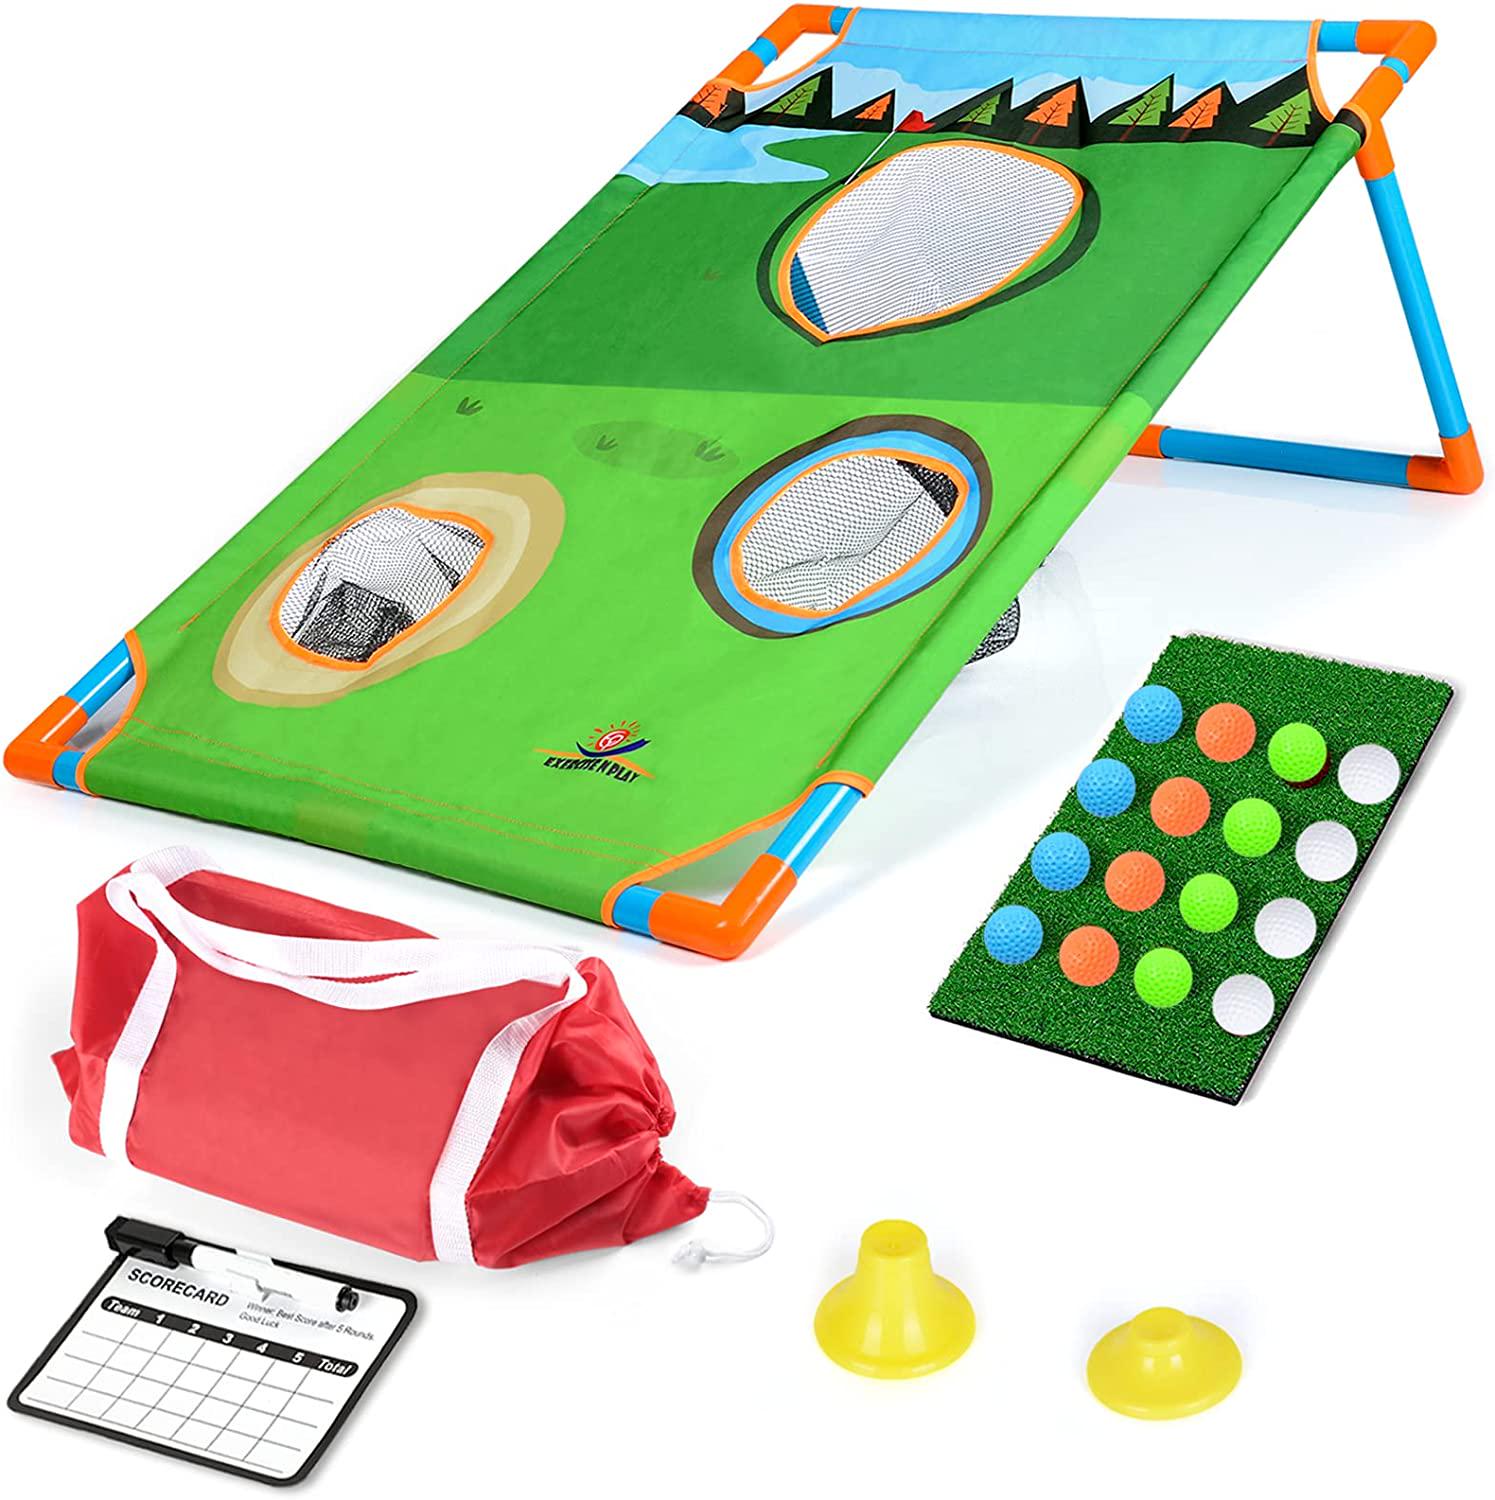 EP EXERCISE N PLAY, EP EXERCISE N PLAY Backyards Golf Cornhole Game |Training Golfing Target Net | Fun New Golf Game for All Ages and Abilities